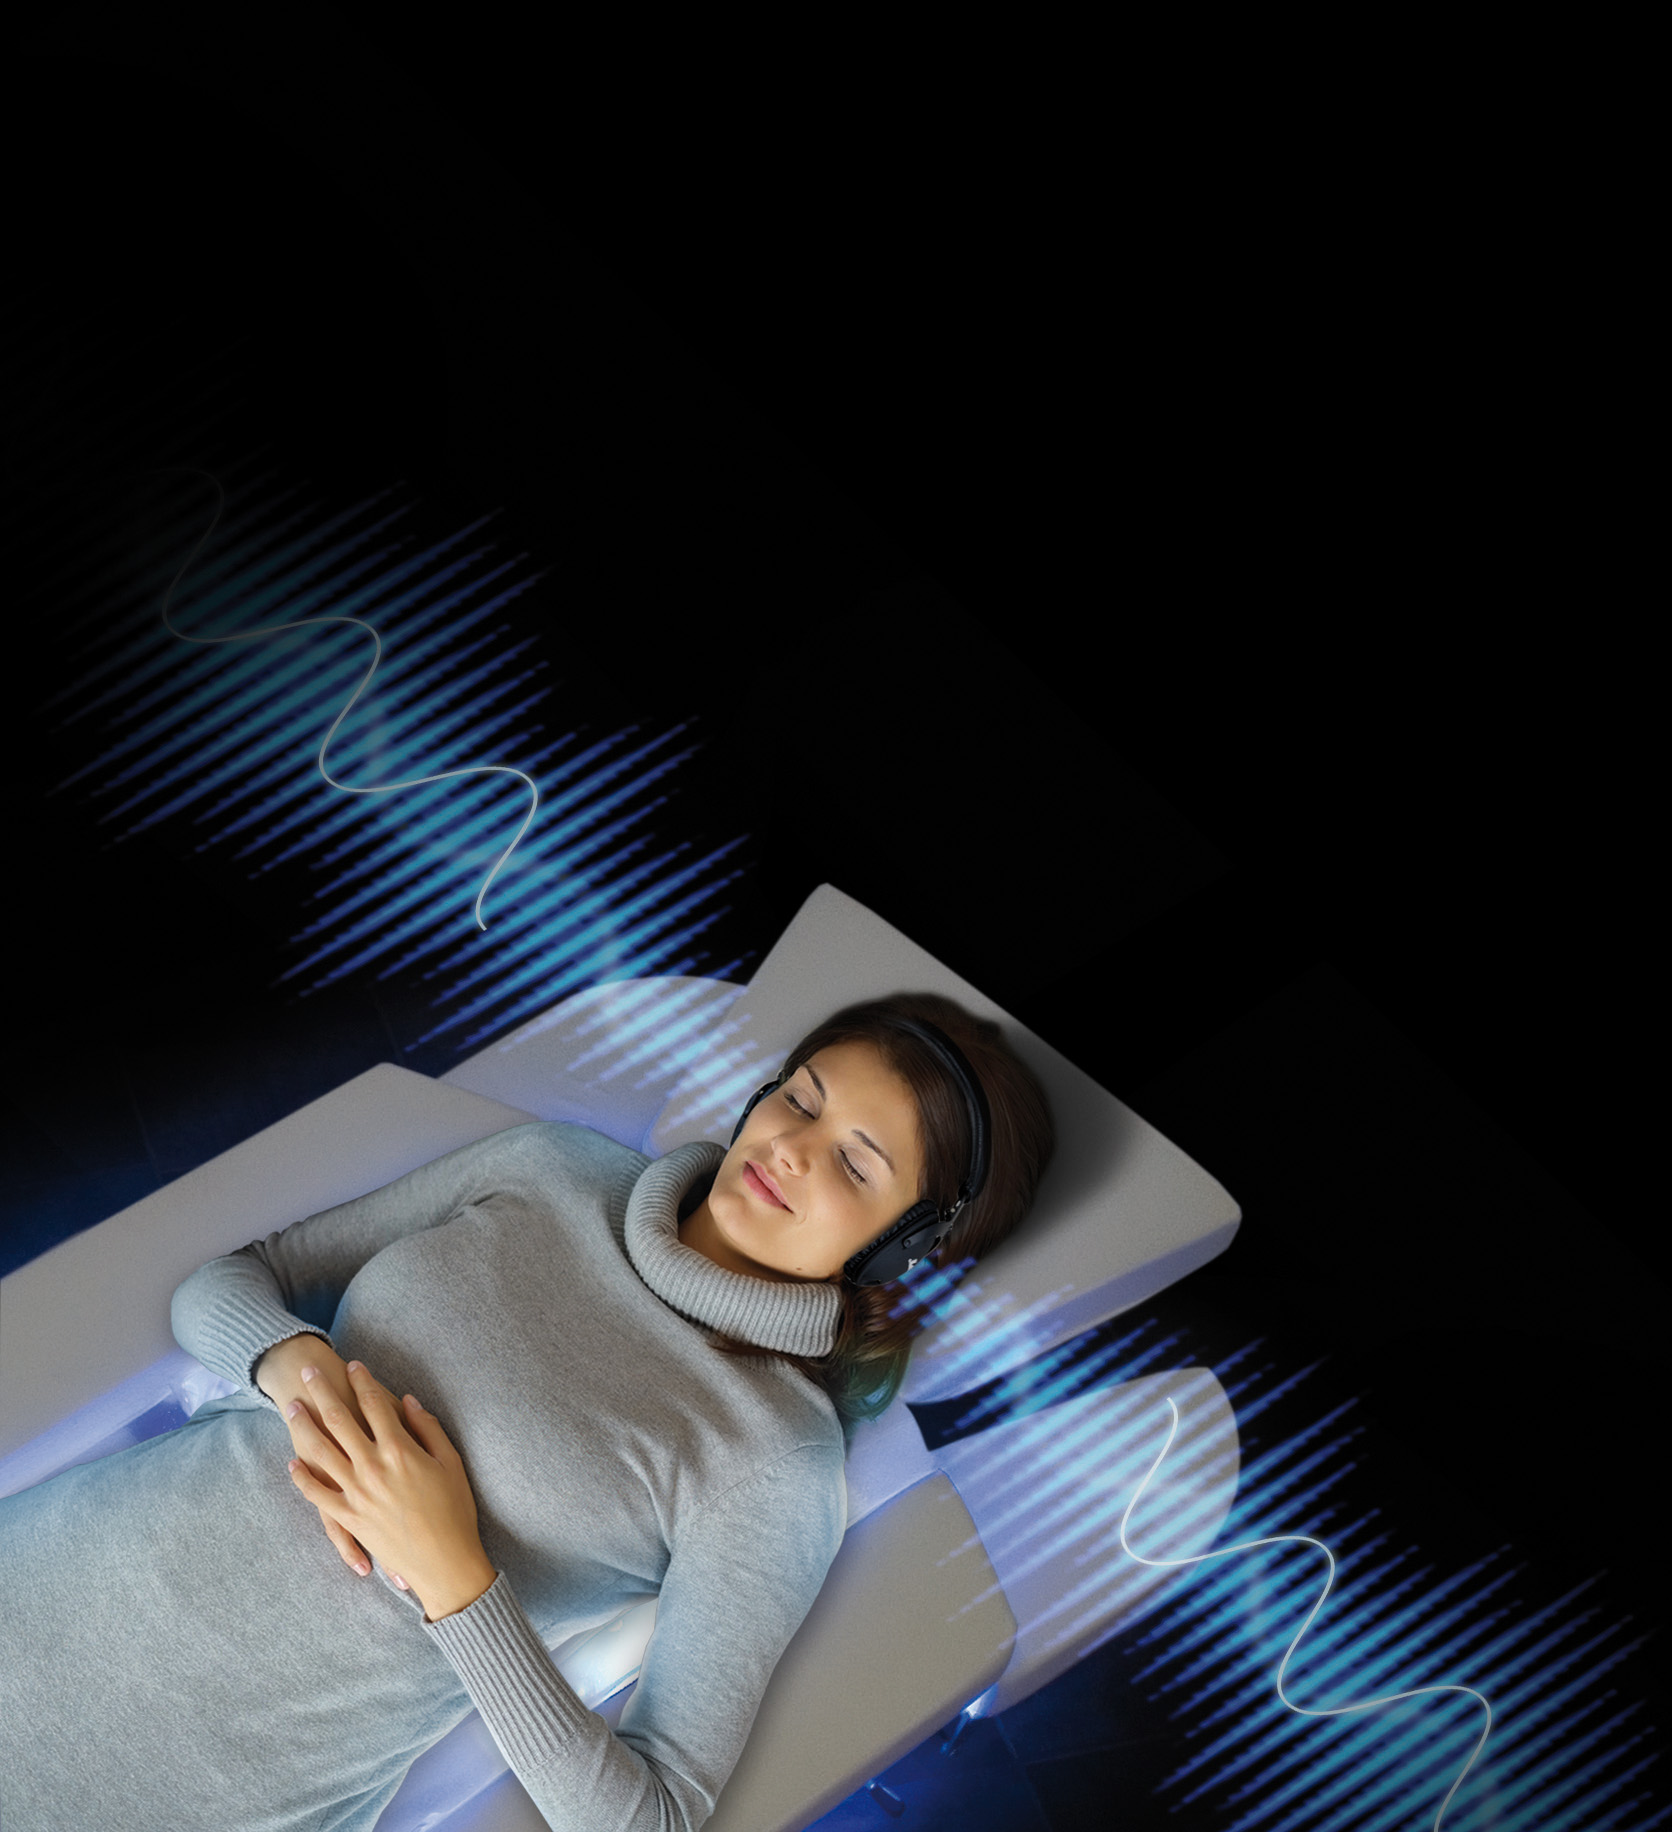 woman napping with headphones and symbols for vibrational sound waves